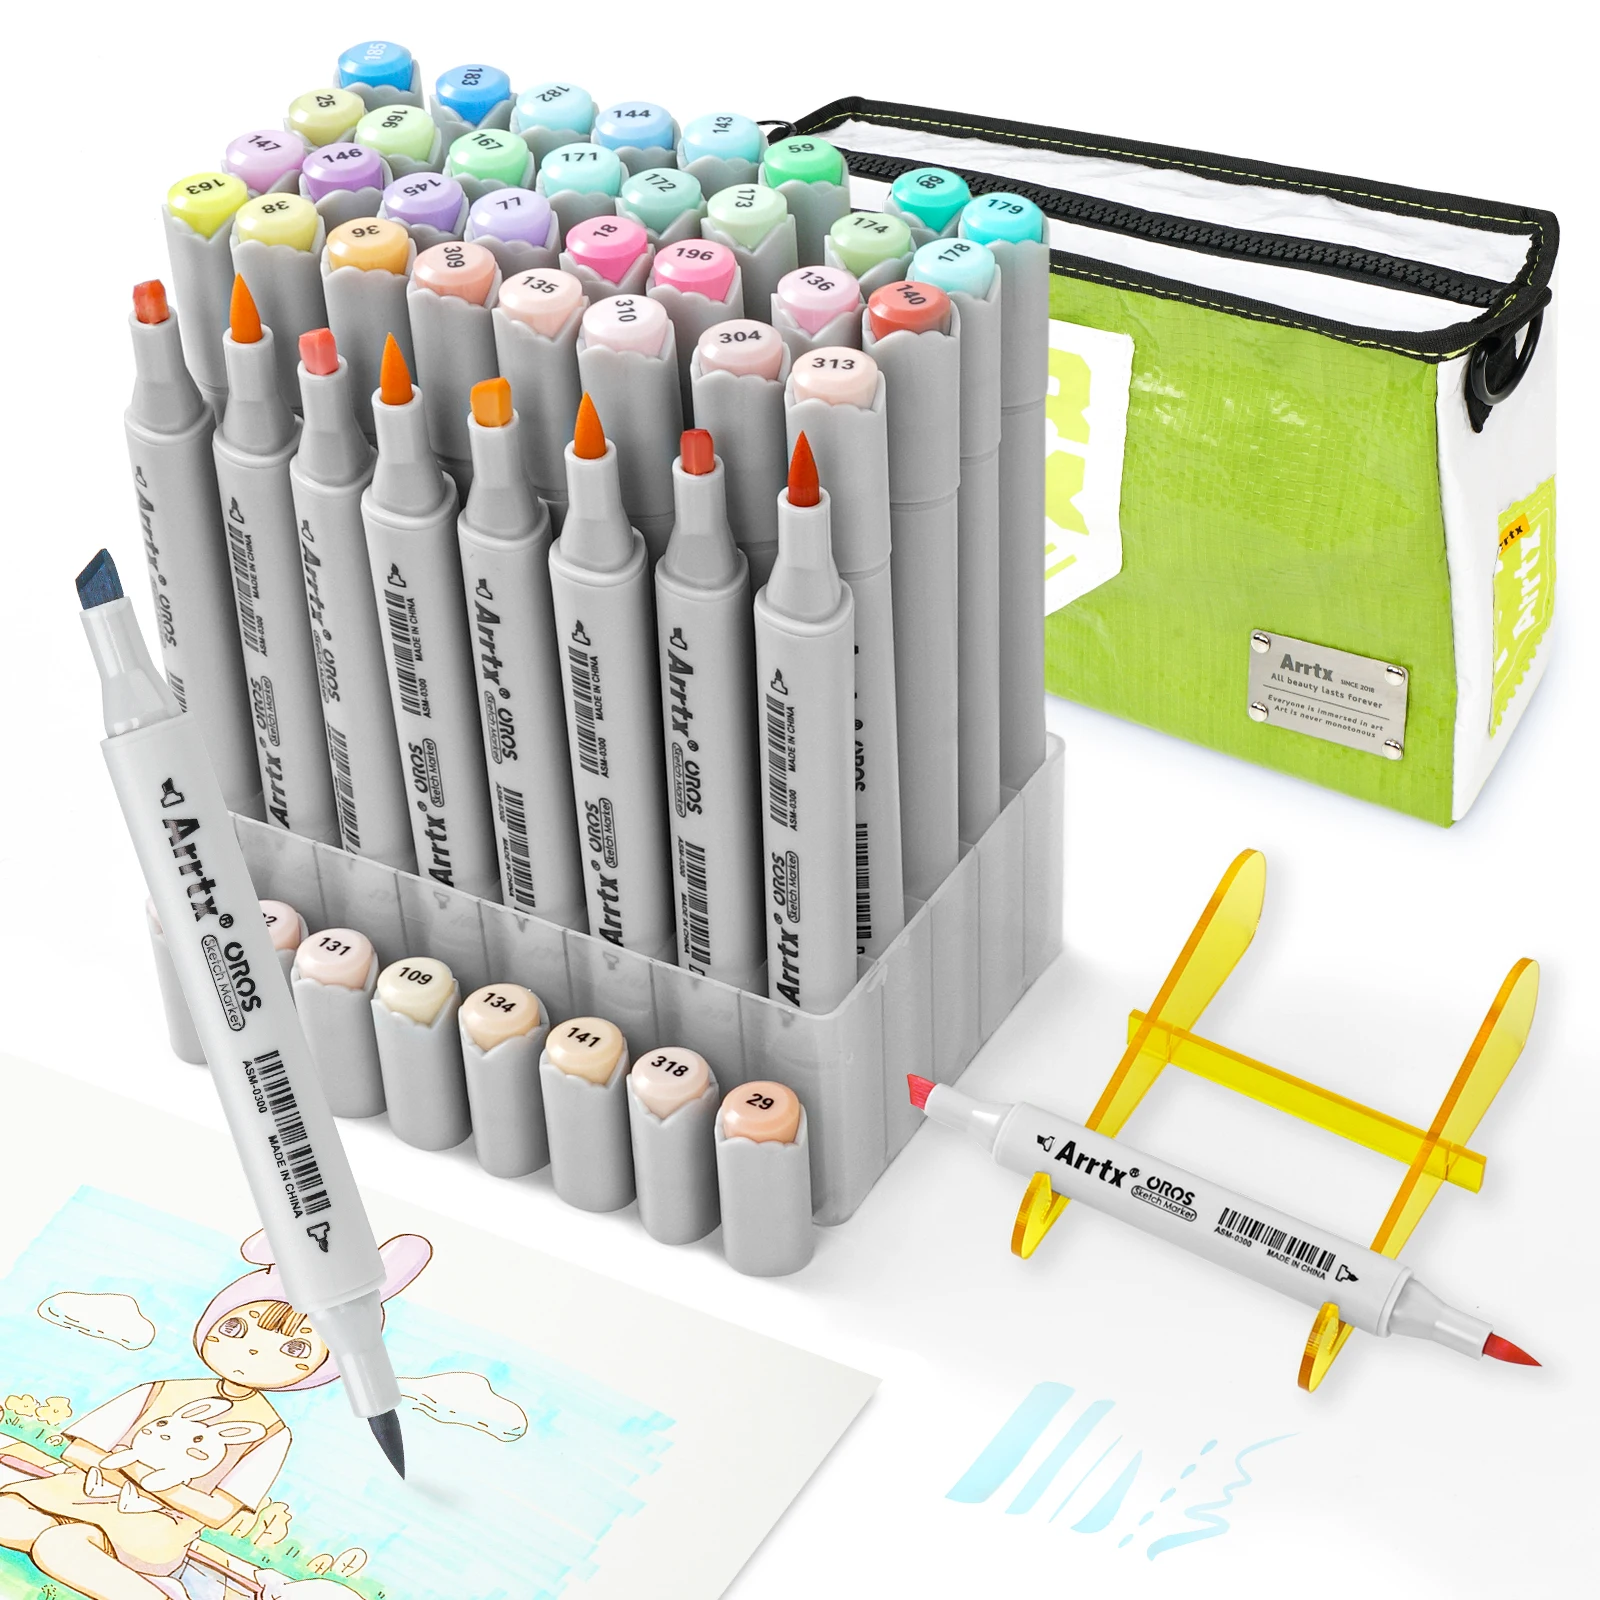 Arrtx OROS 40 Pastel Colors Brush Markers Set Alcohol-based Stable and Durable Ink Permanent for Anime Illustration Design